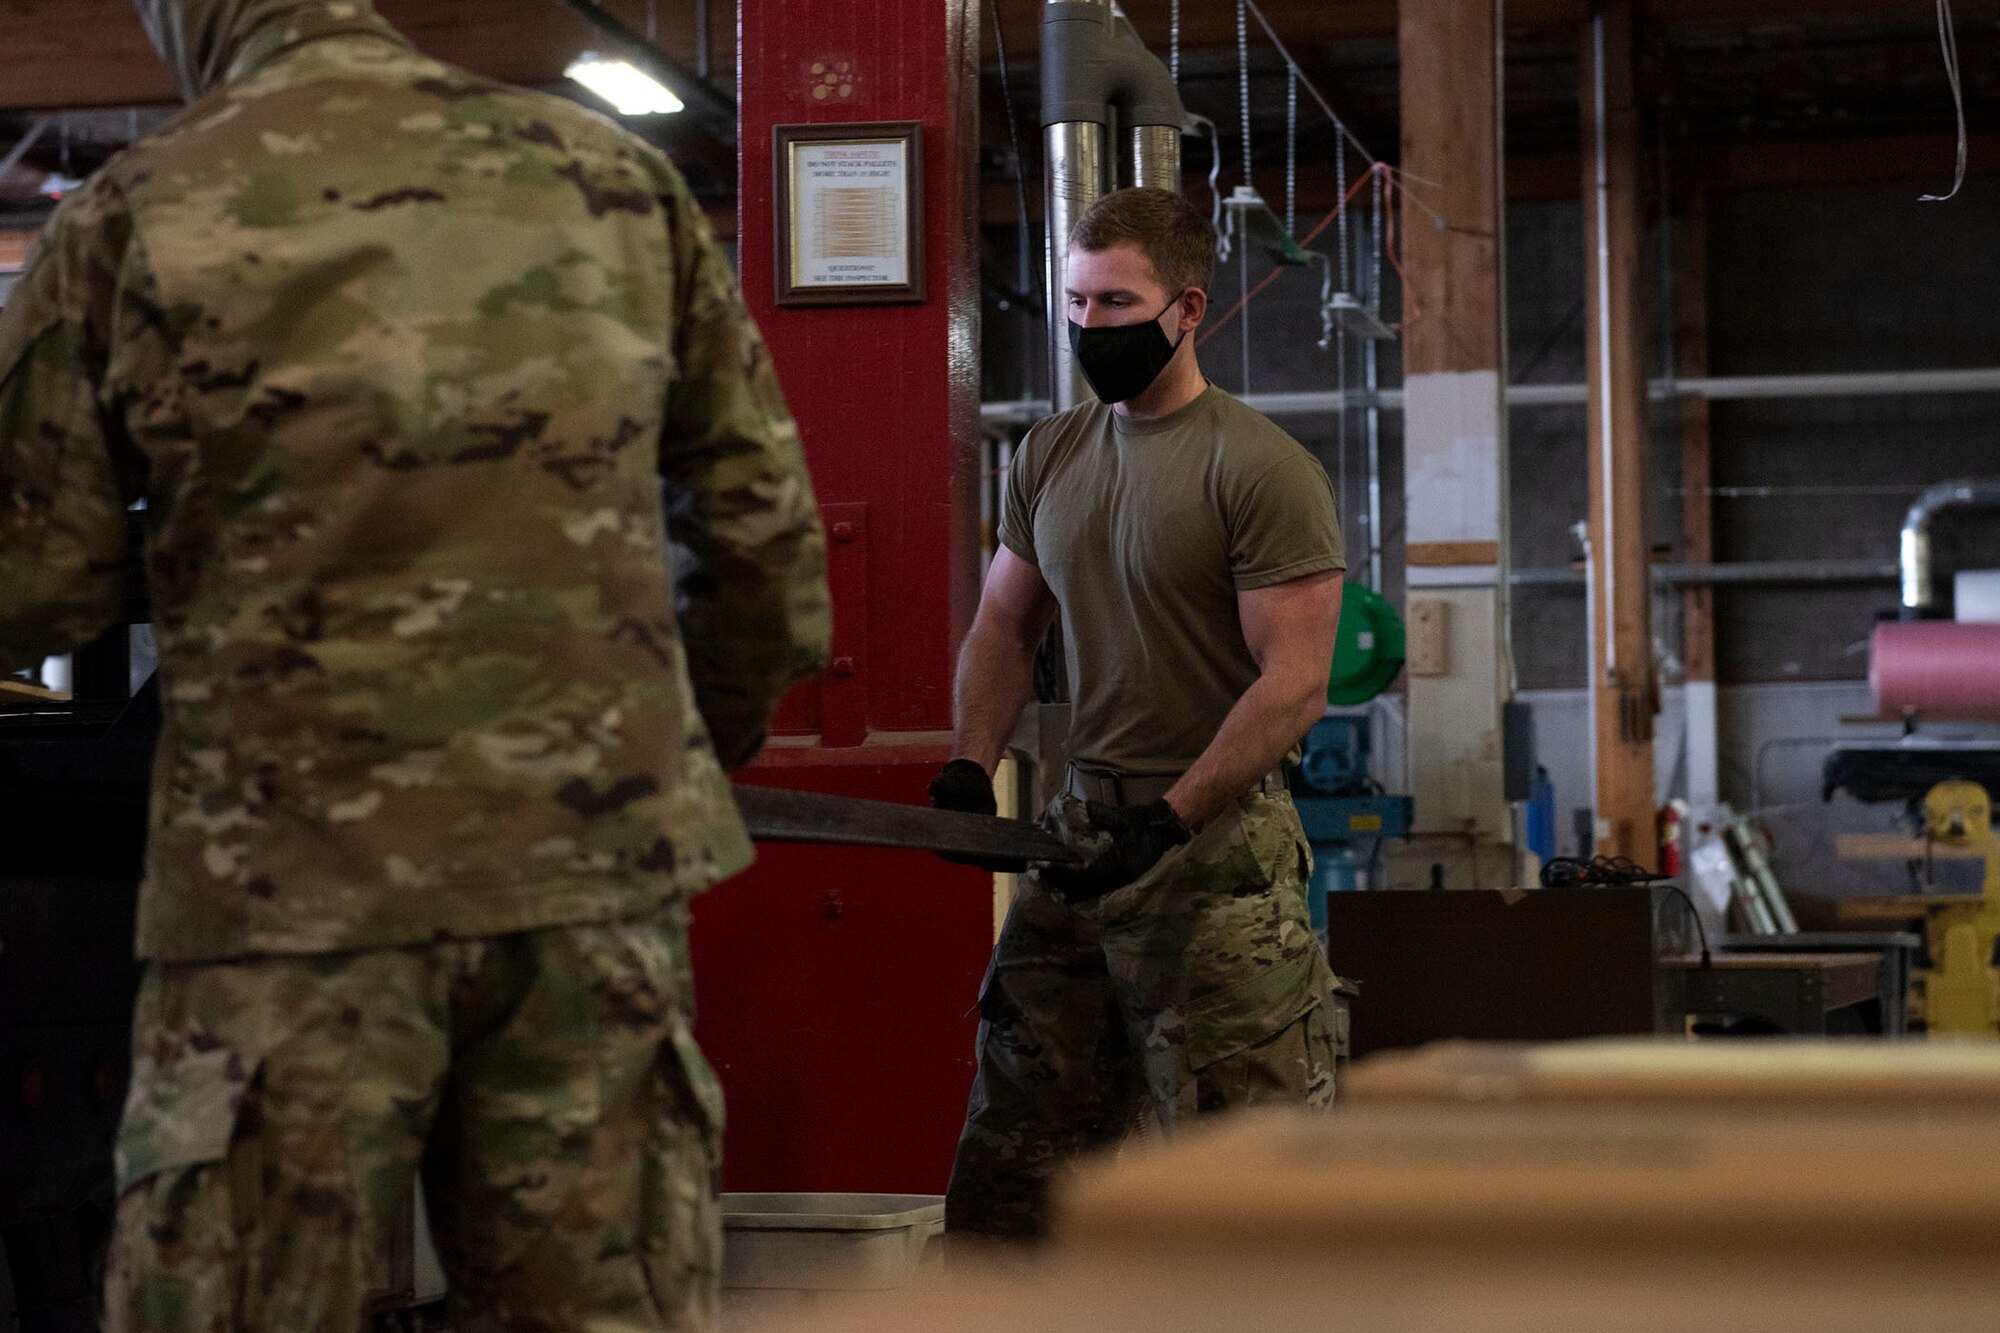 Airman 1st Class Orion Jones, 341st Logistics Readiness Squadron vehicle operator, loads packaged materials into a delivery truck in the cargo hangar April 12, 2021, on Malmstrom Air Force Base, Mont.